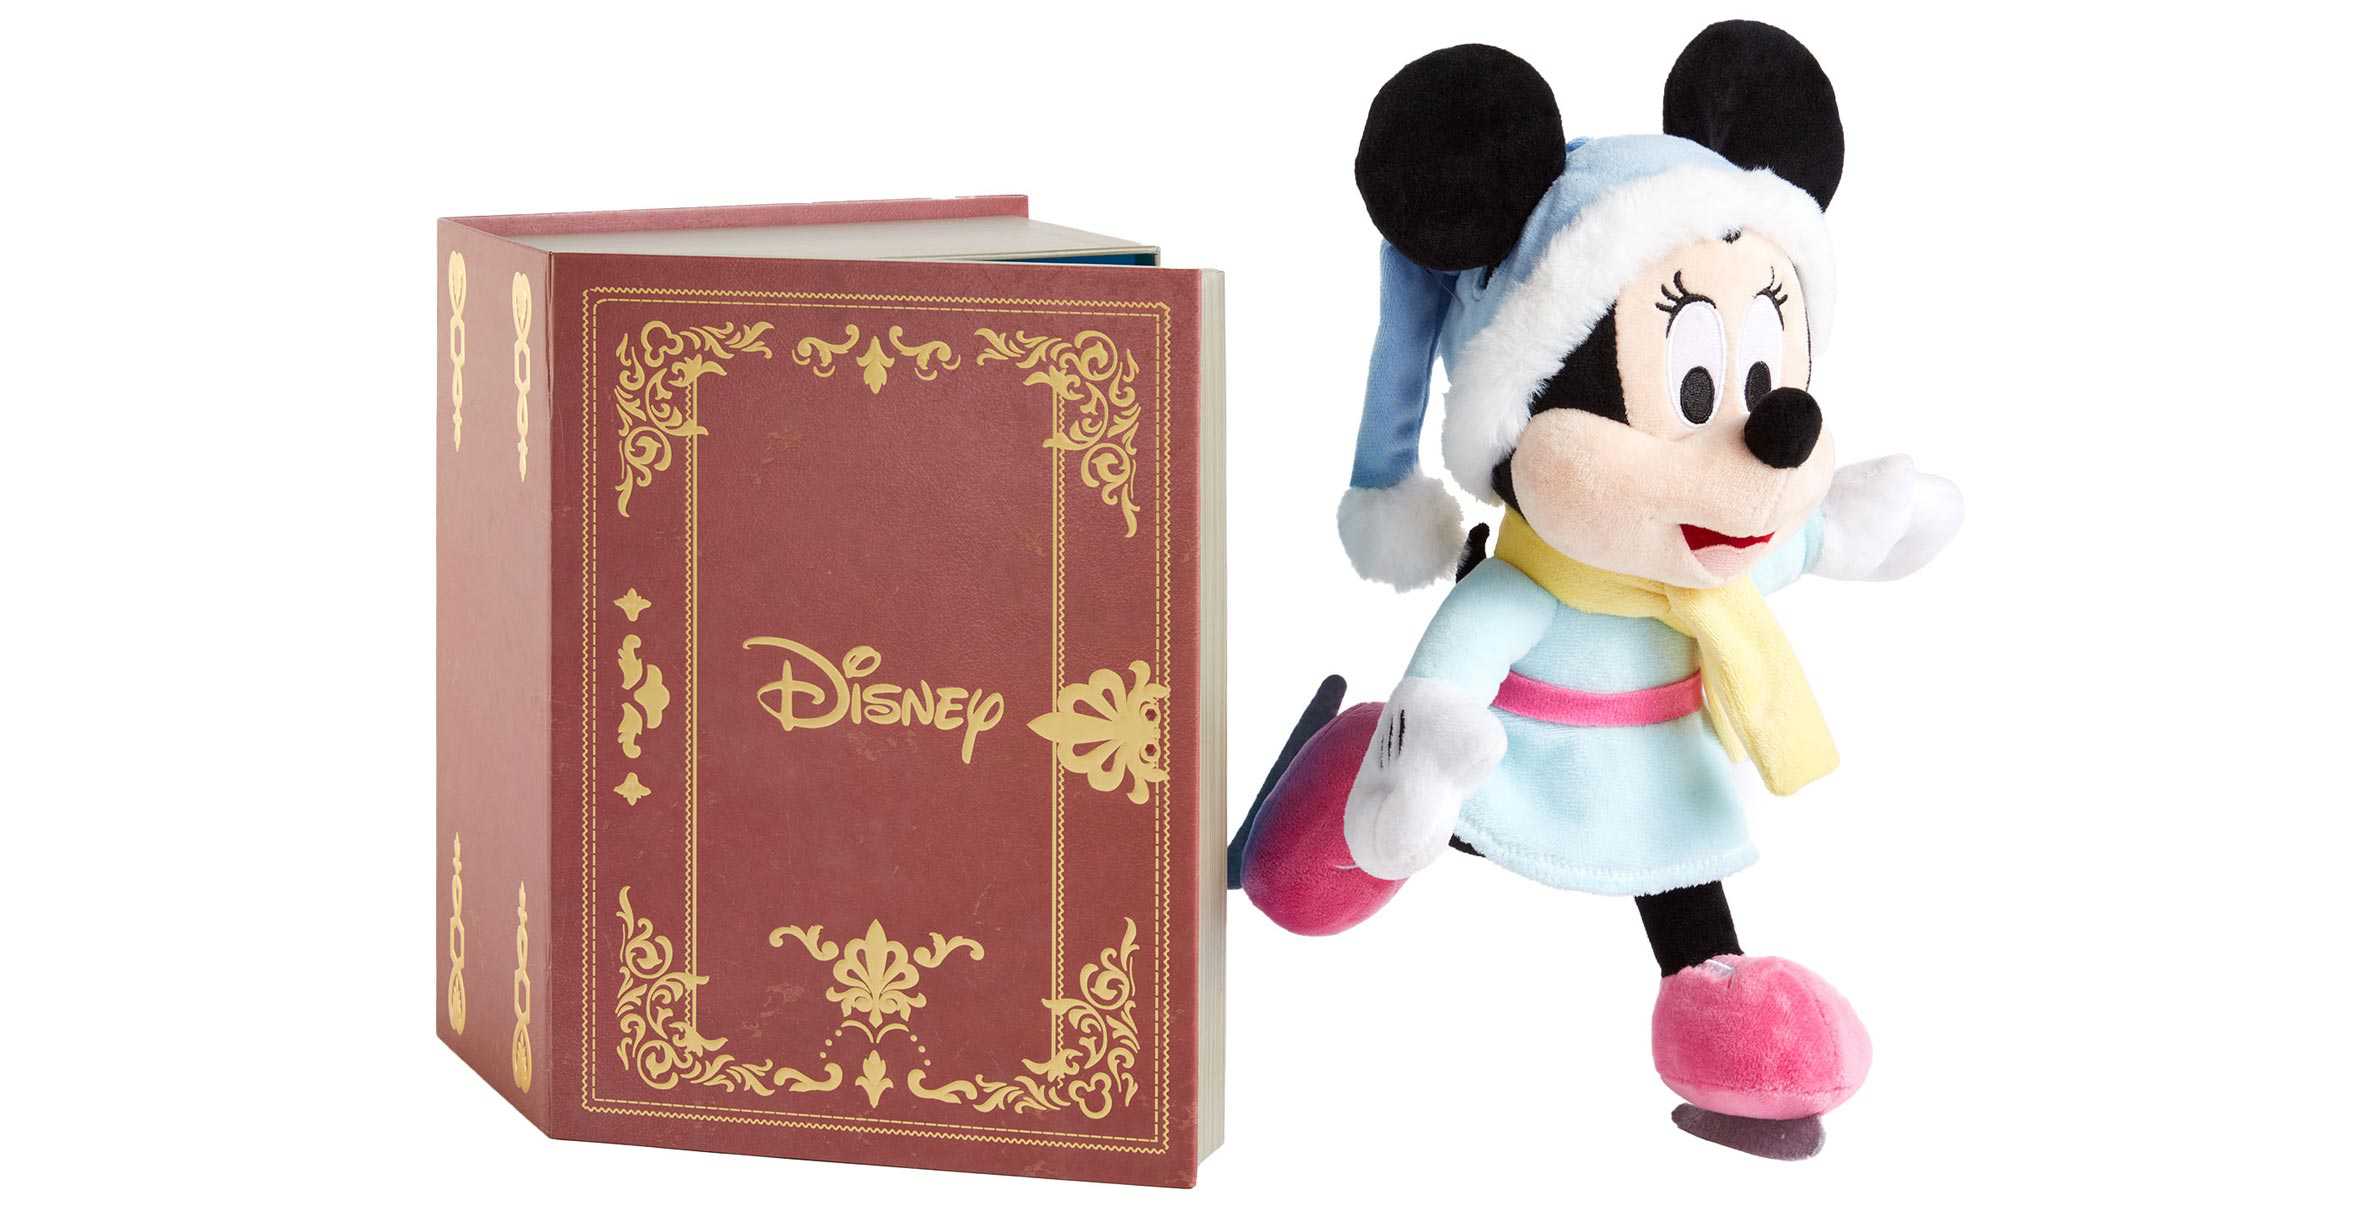 The Skating Minnie Mouse and Journal, as featured in 'From our family to yours'.